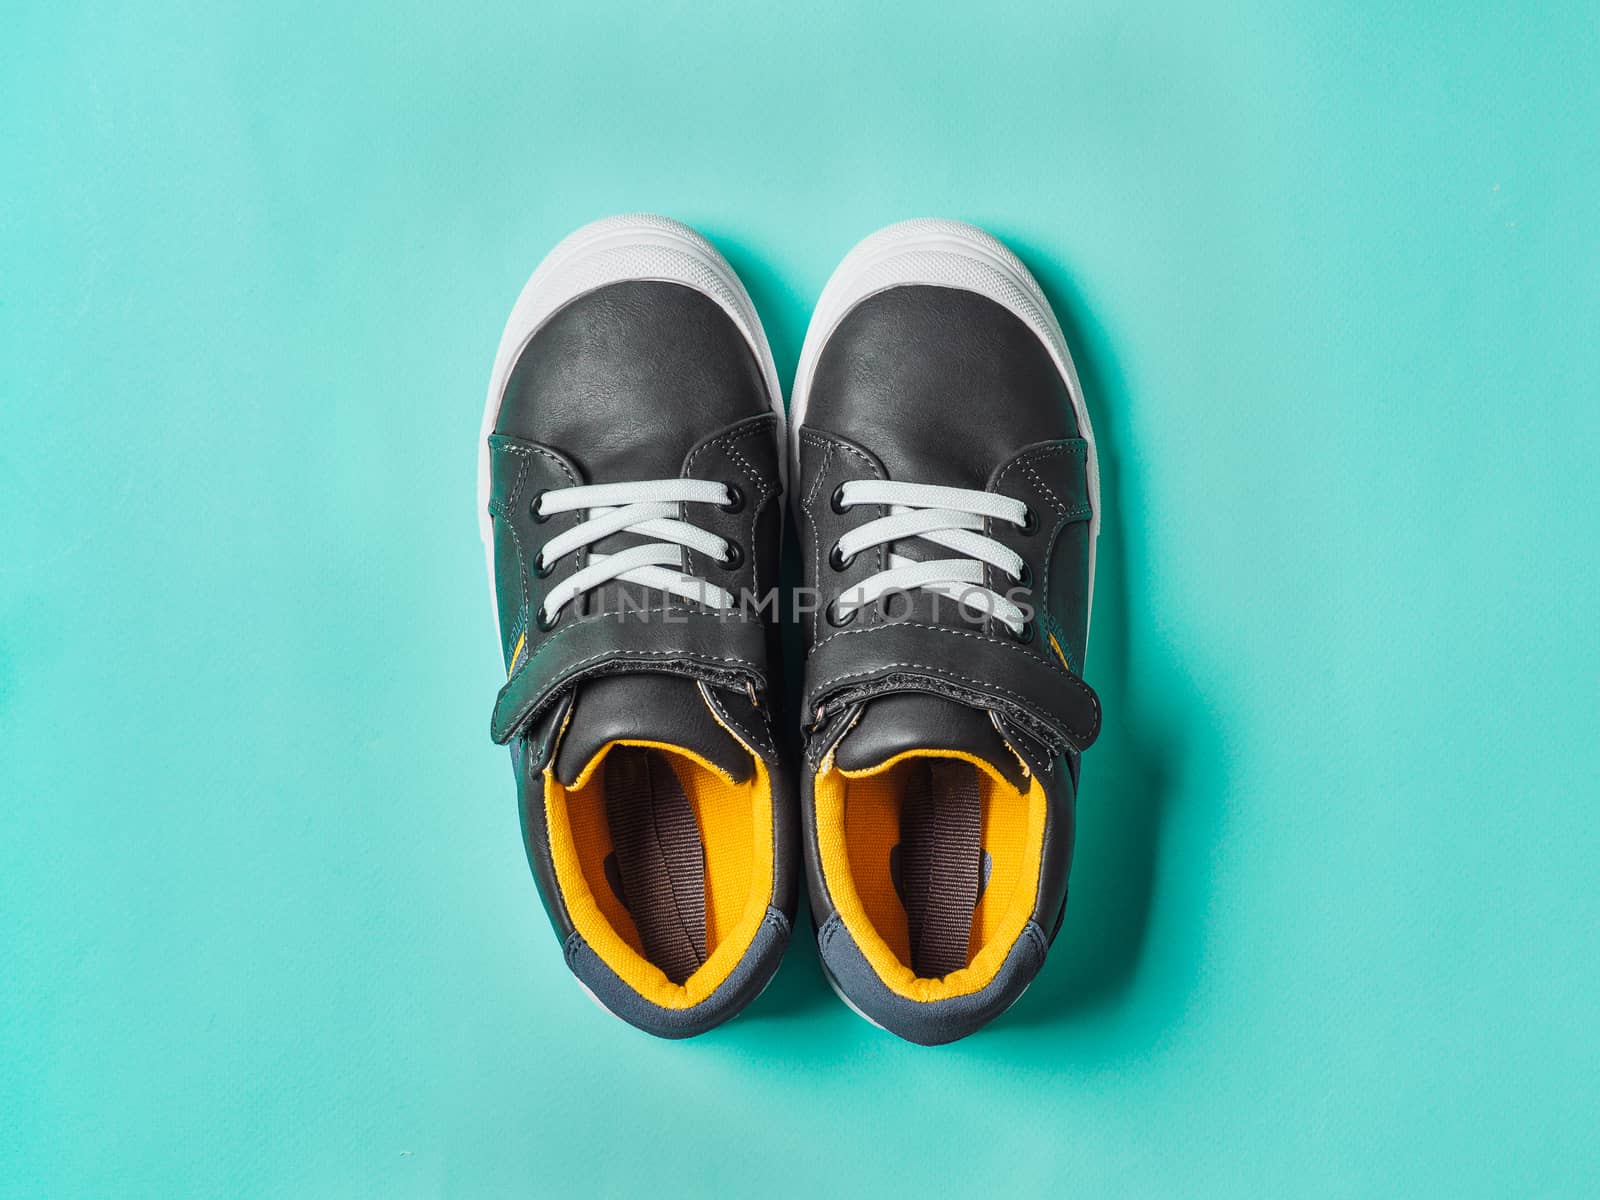 Gray and yellow sneakers on blue background by fascinadora